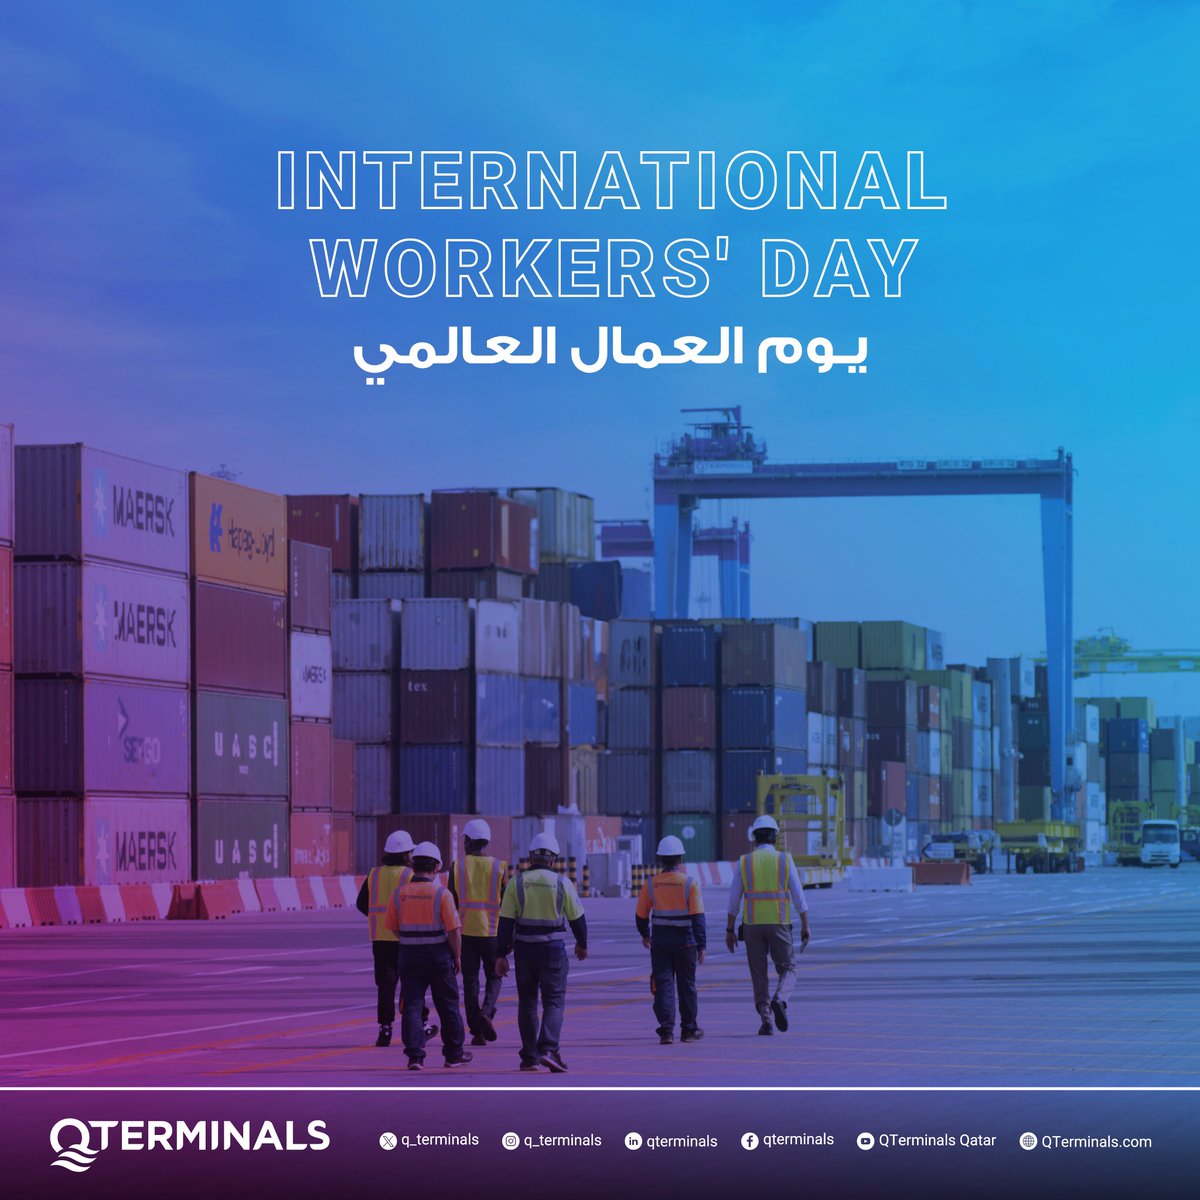 This #InternationalWorkersDay , we celebrate the heart of QTerminals - our amazing team! Your dedication and skills keep us moving forward. We're committed to empowering you with a safe and thriving work environment. #PeopleFirst

بمناسبة اليوم العالمي للعمال نحتفل بجوهر…